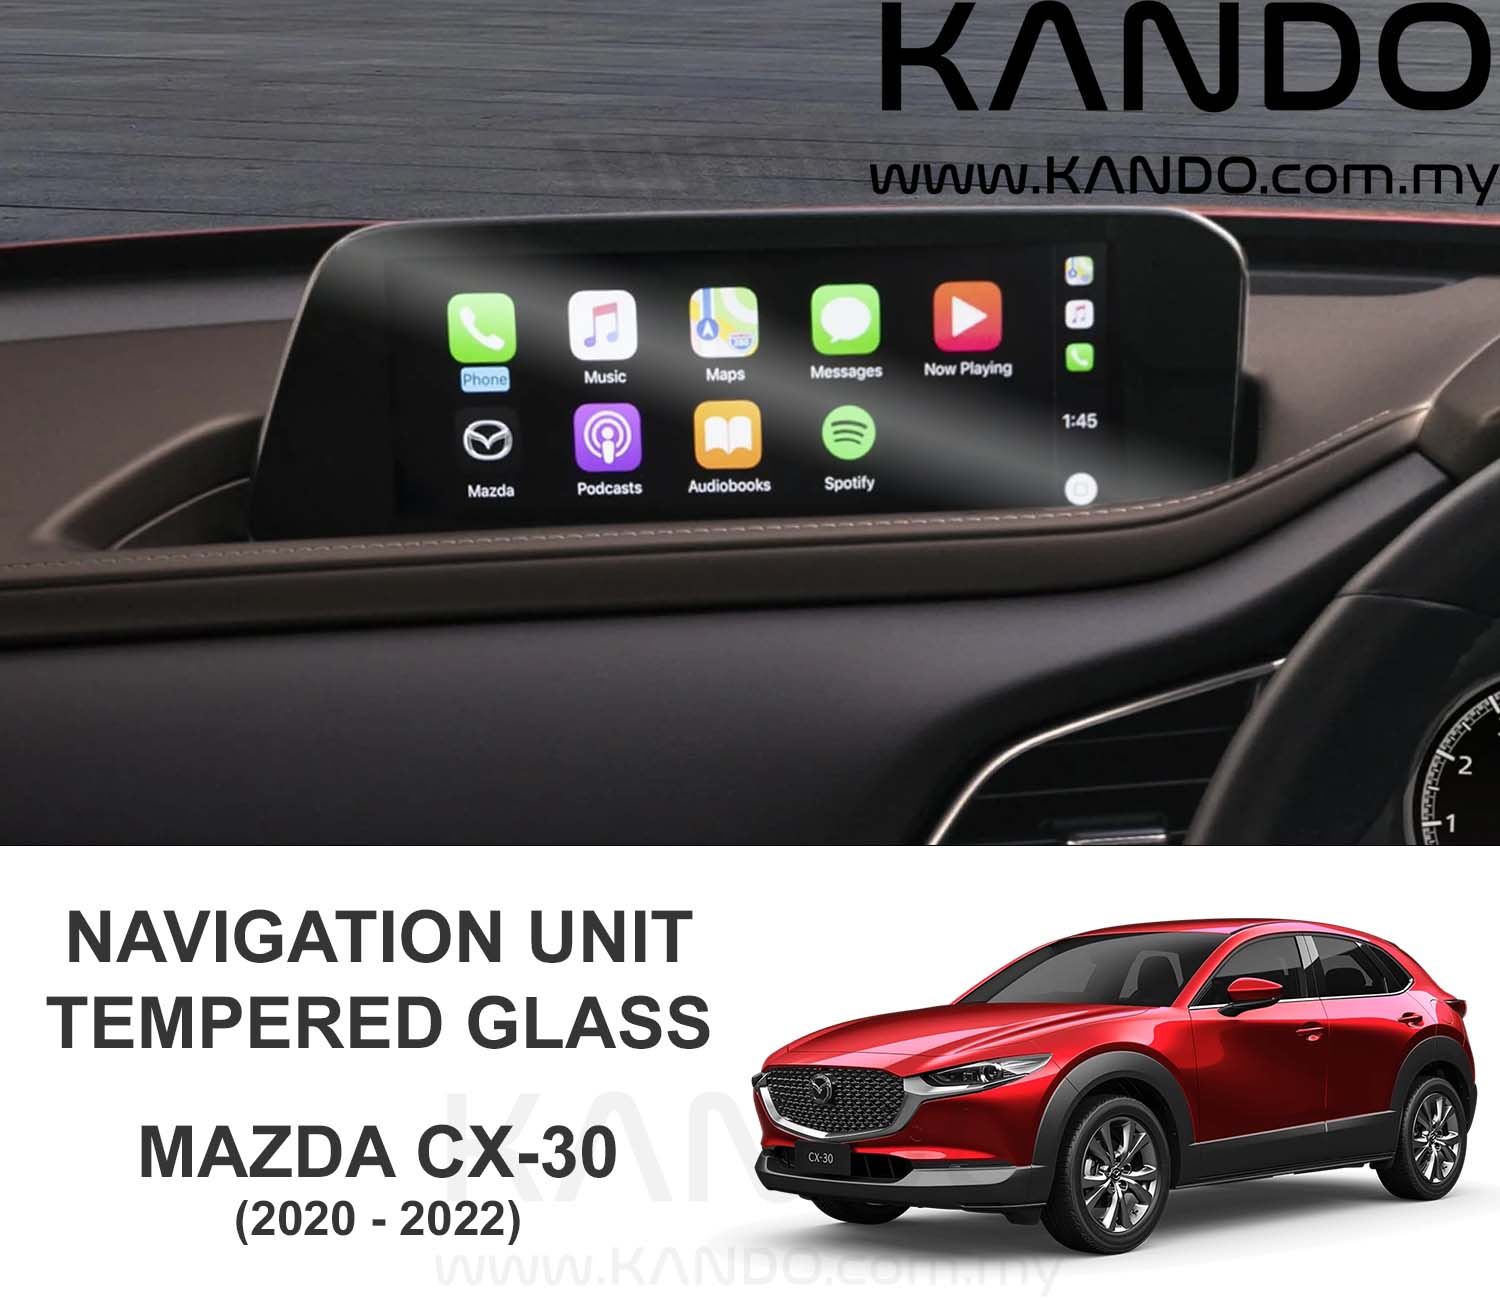 svælg Skygge At håndtere Mazda CX-30 MZD Connect Tempered Glass Protector Mazda CX30 Tempered Glass  Protector MZD Connect 2020 2021 Head Unit Screen Infotainment Tempered  Glass Protector Navigation Mazda CX-30 GPS Glass CX30 Tempered Glass CX30